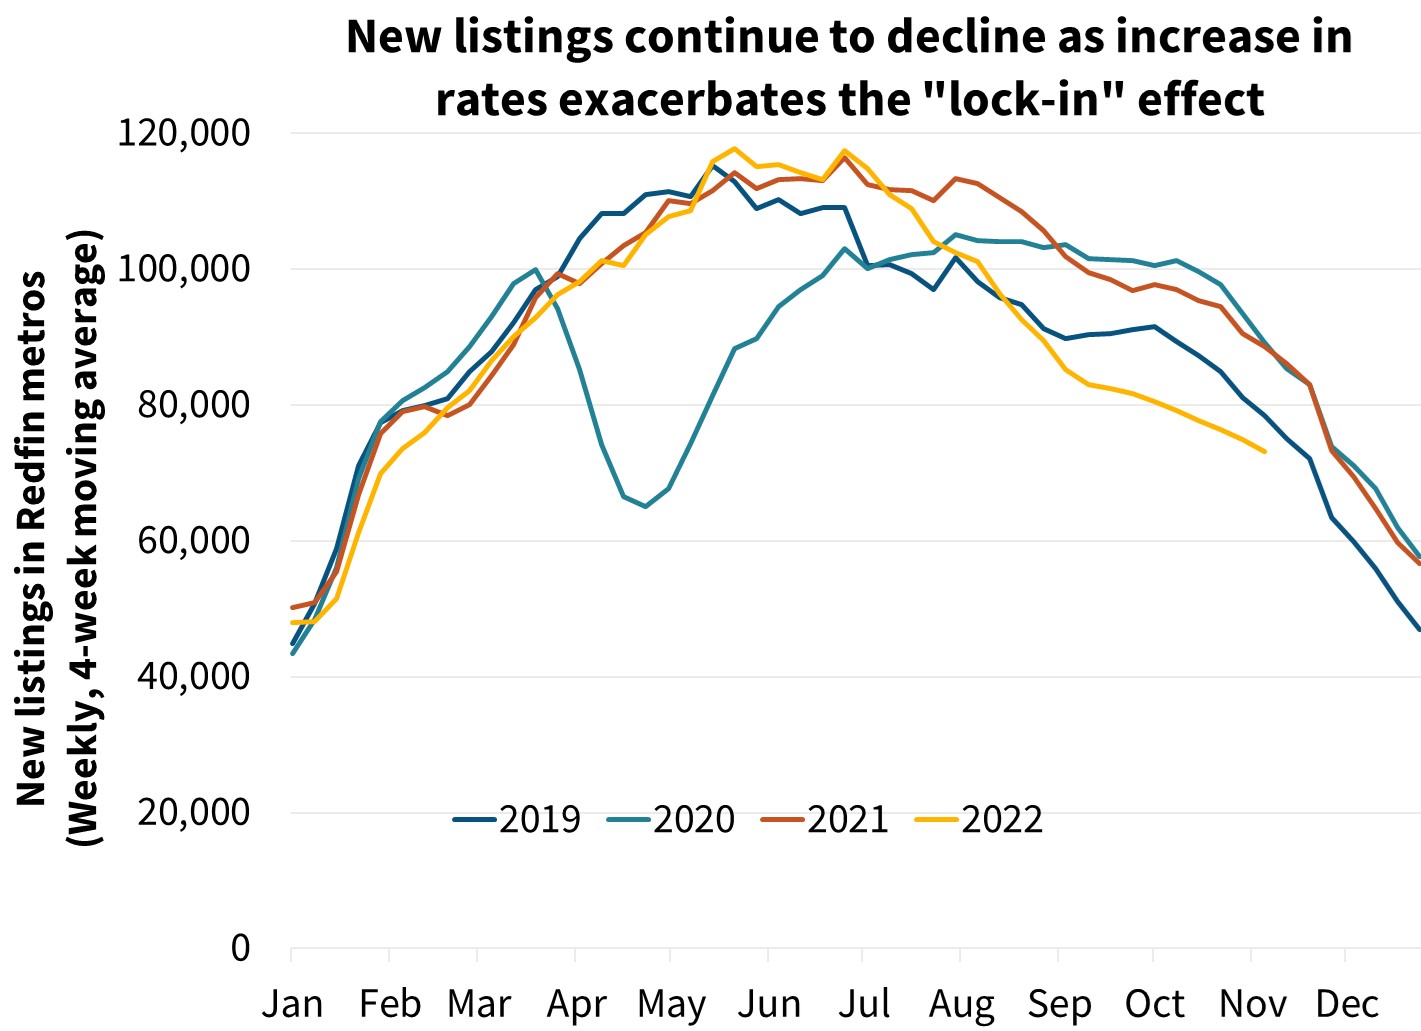  New listings continue to decline as increase in rates exacerbates the “lock-in” effect 